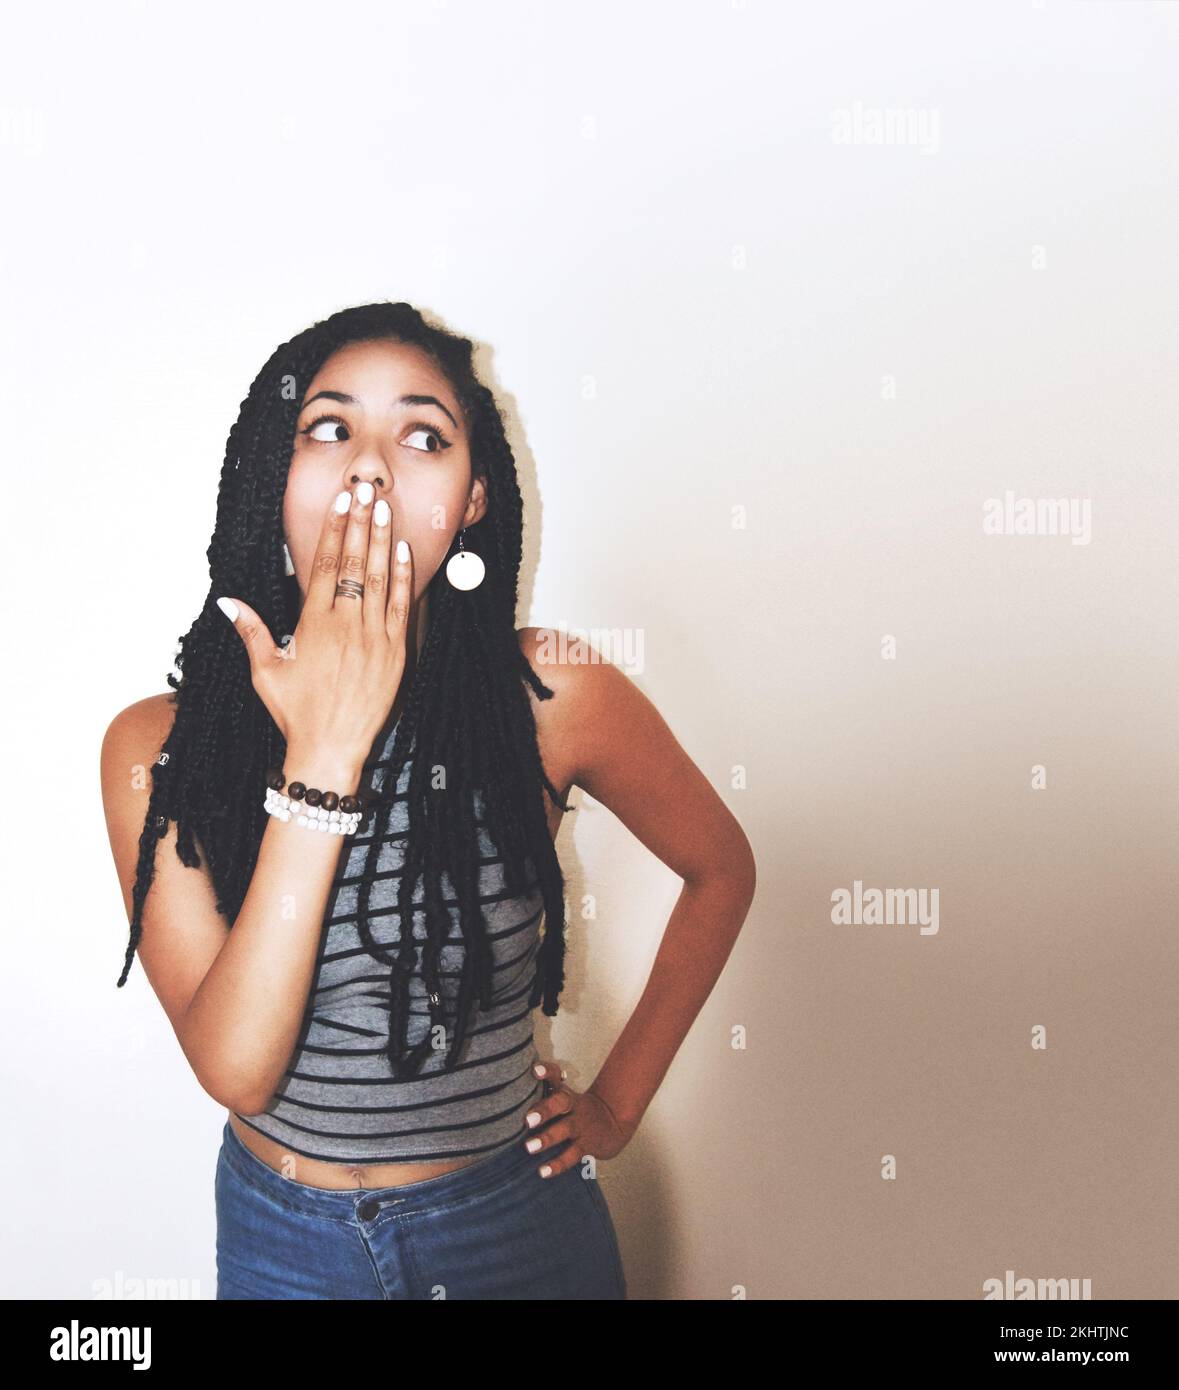 Black woman, shocked and surprised with hand over her mouth in expression against a gradient studio background. African American female model face Stock Photo